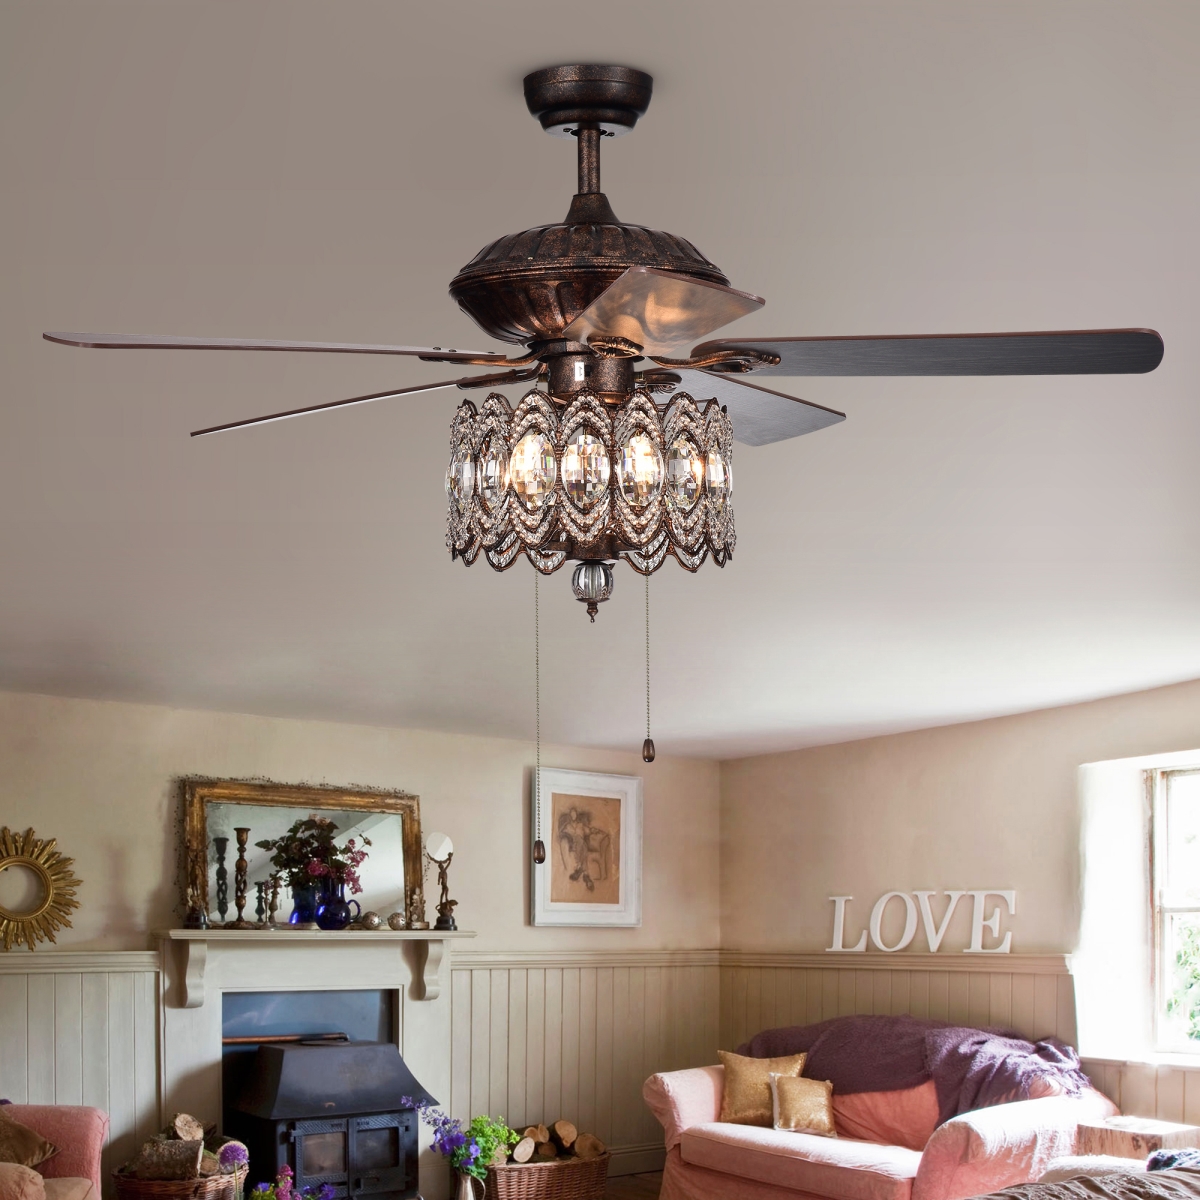 Cfl-8324rb 52 In. Mariposa Chandelier Ceiling Fan With Crystal Shade, Rustic Bronze